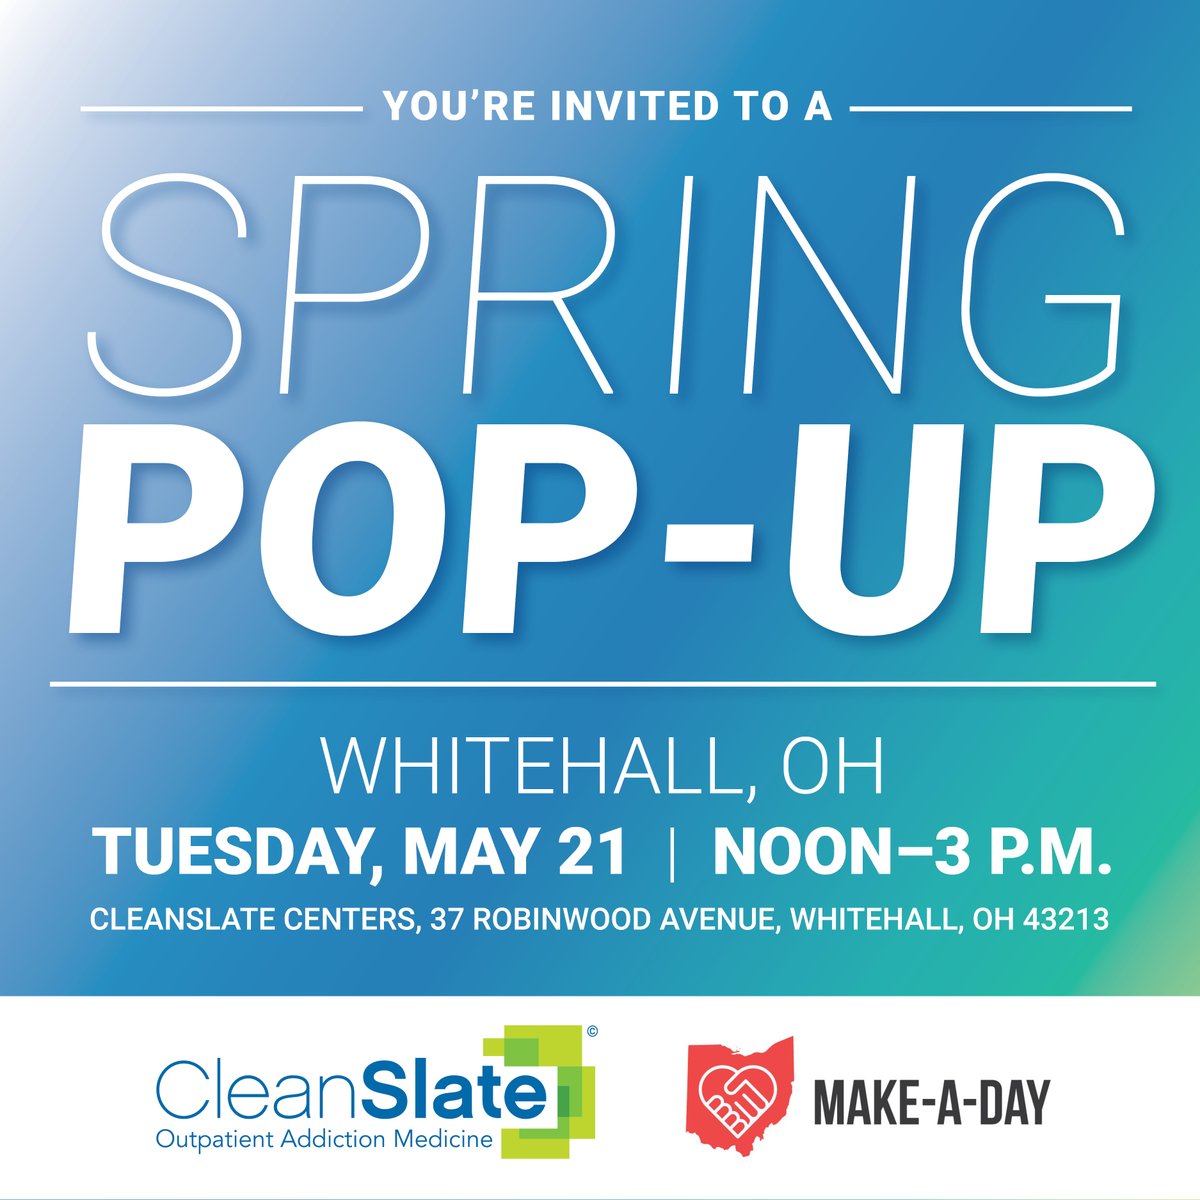 We're excited to announce the CleanSlate Spring Pop-Up at our Whitehall center bit.ly/49z6oFi! Come check out the food trucks bringing free lunch for the community, along with Narcan, mobile phones, and much more! All are welcome #recoverycommunity #addictiontreatment